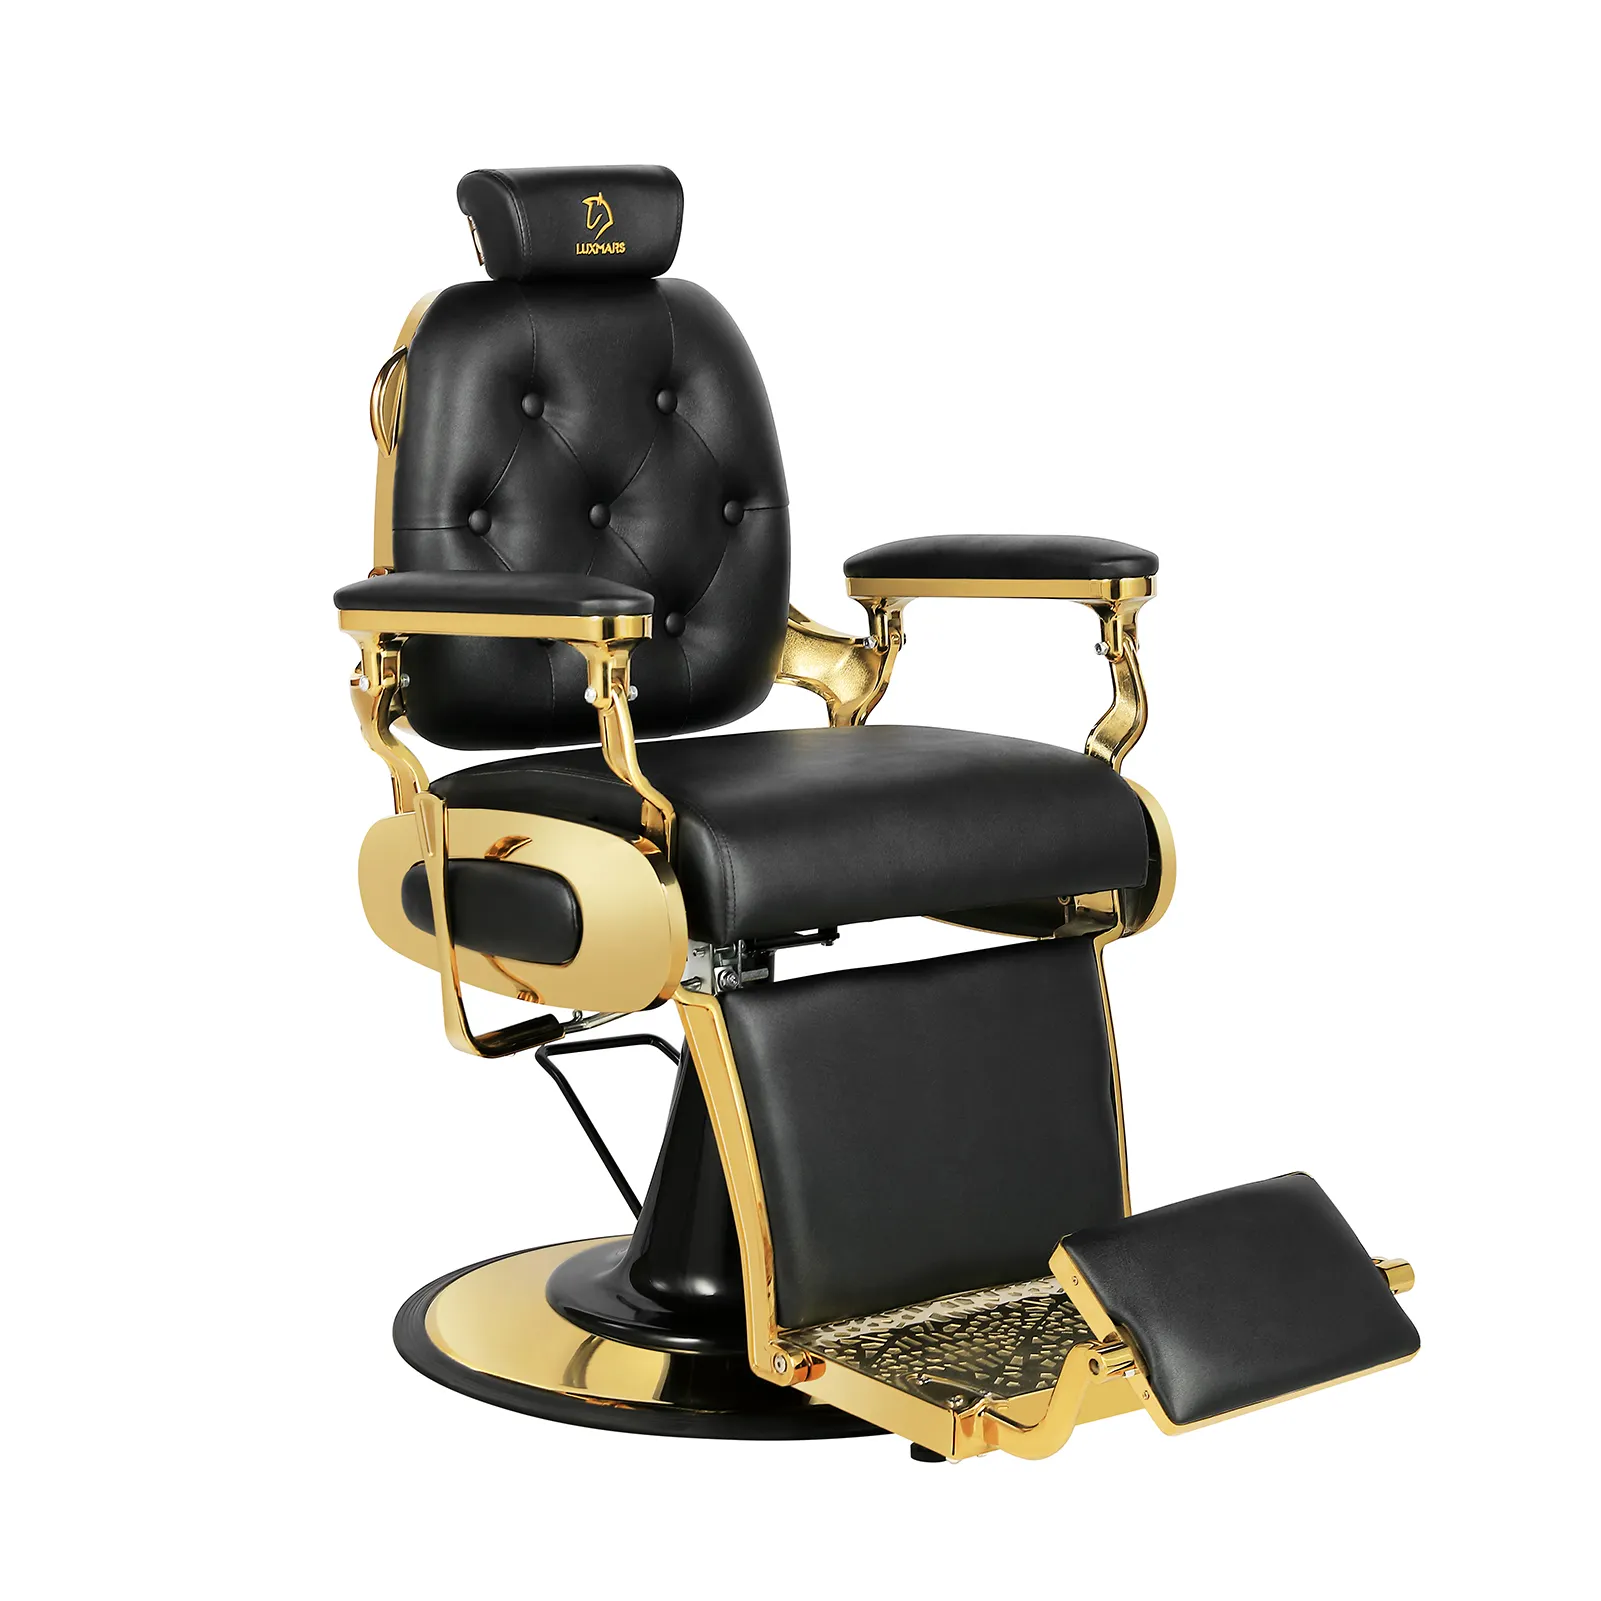 Comfortable Hydraulic Men's Barber Chair for Salon Styling